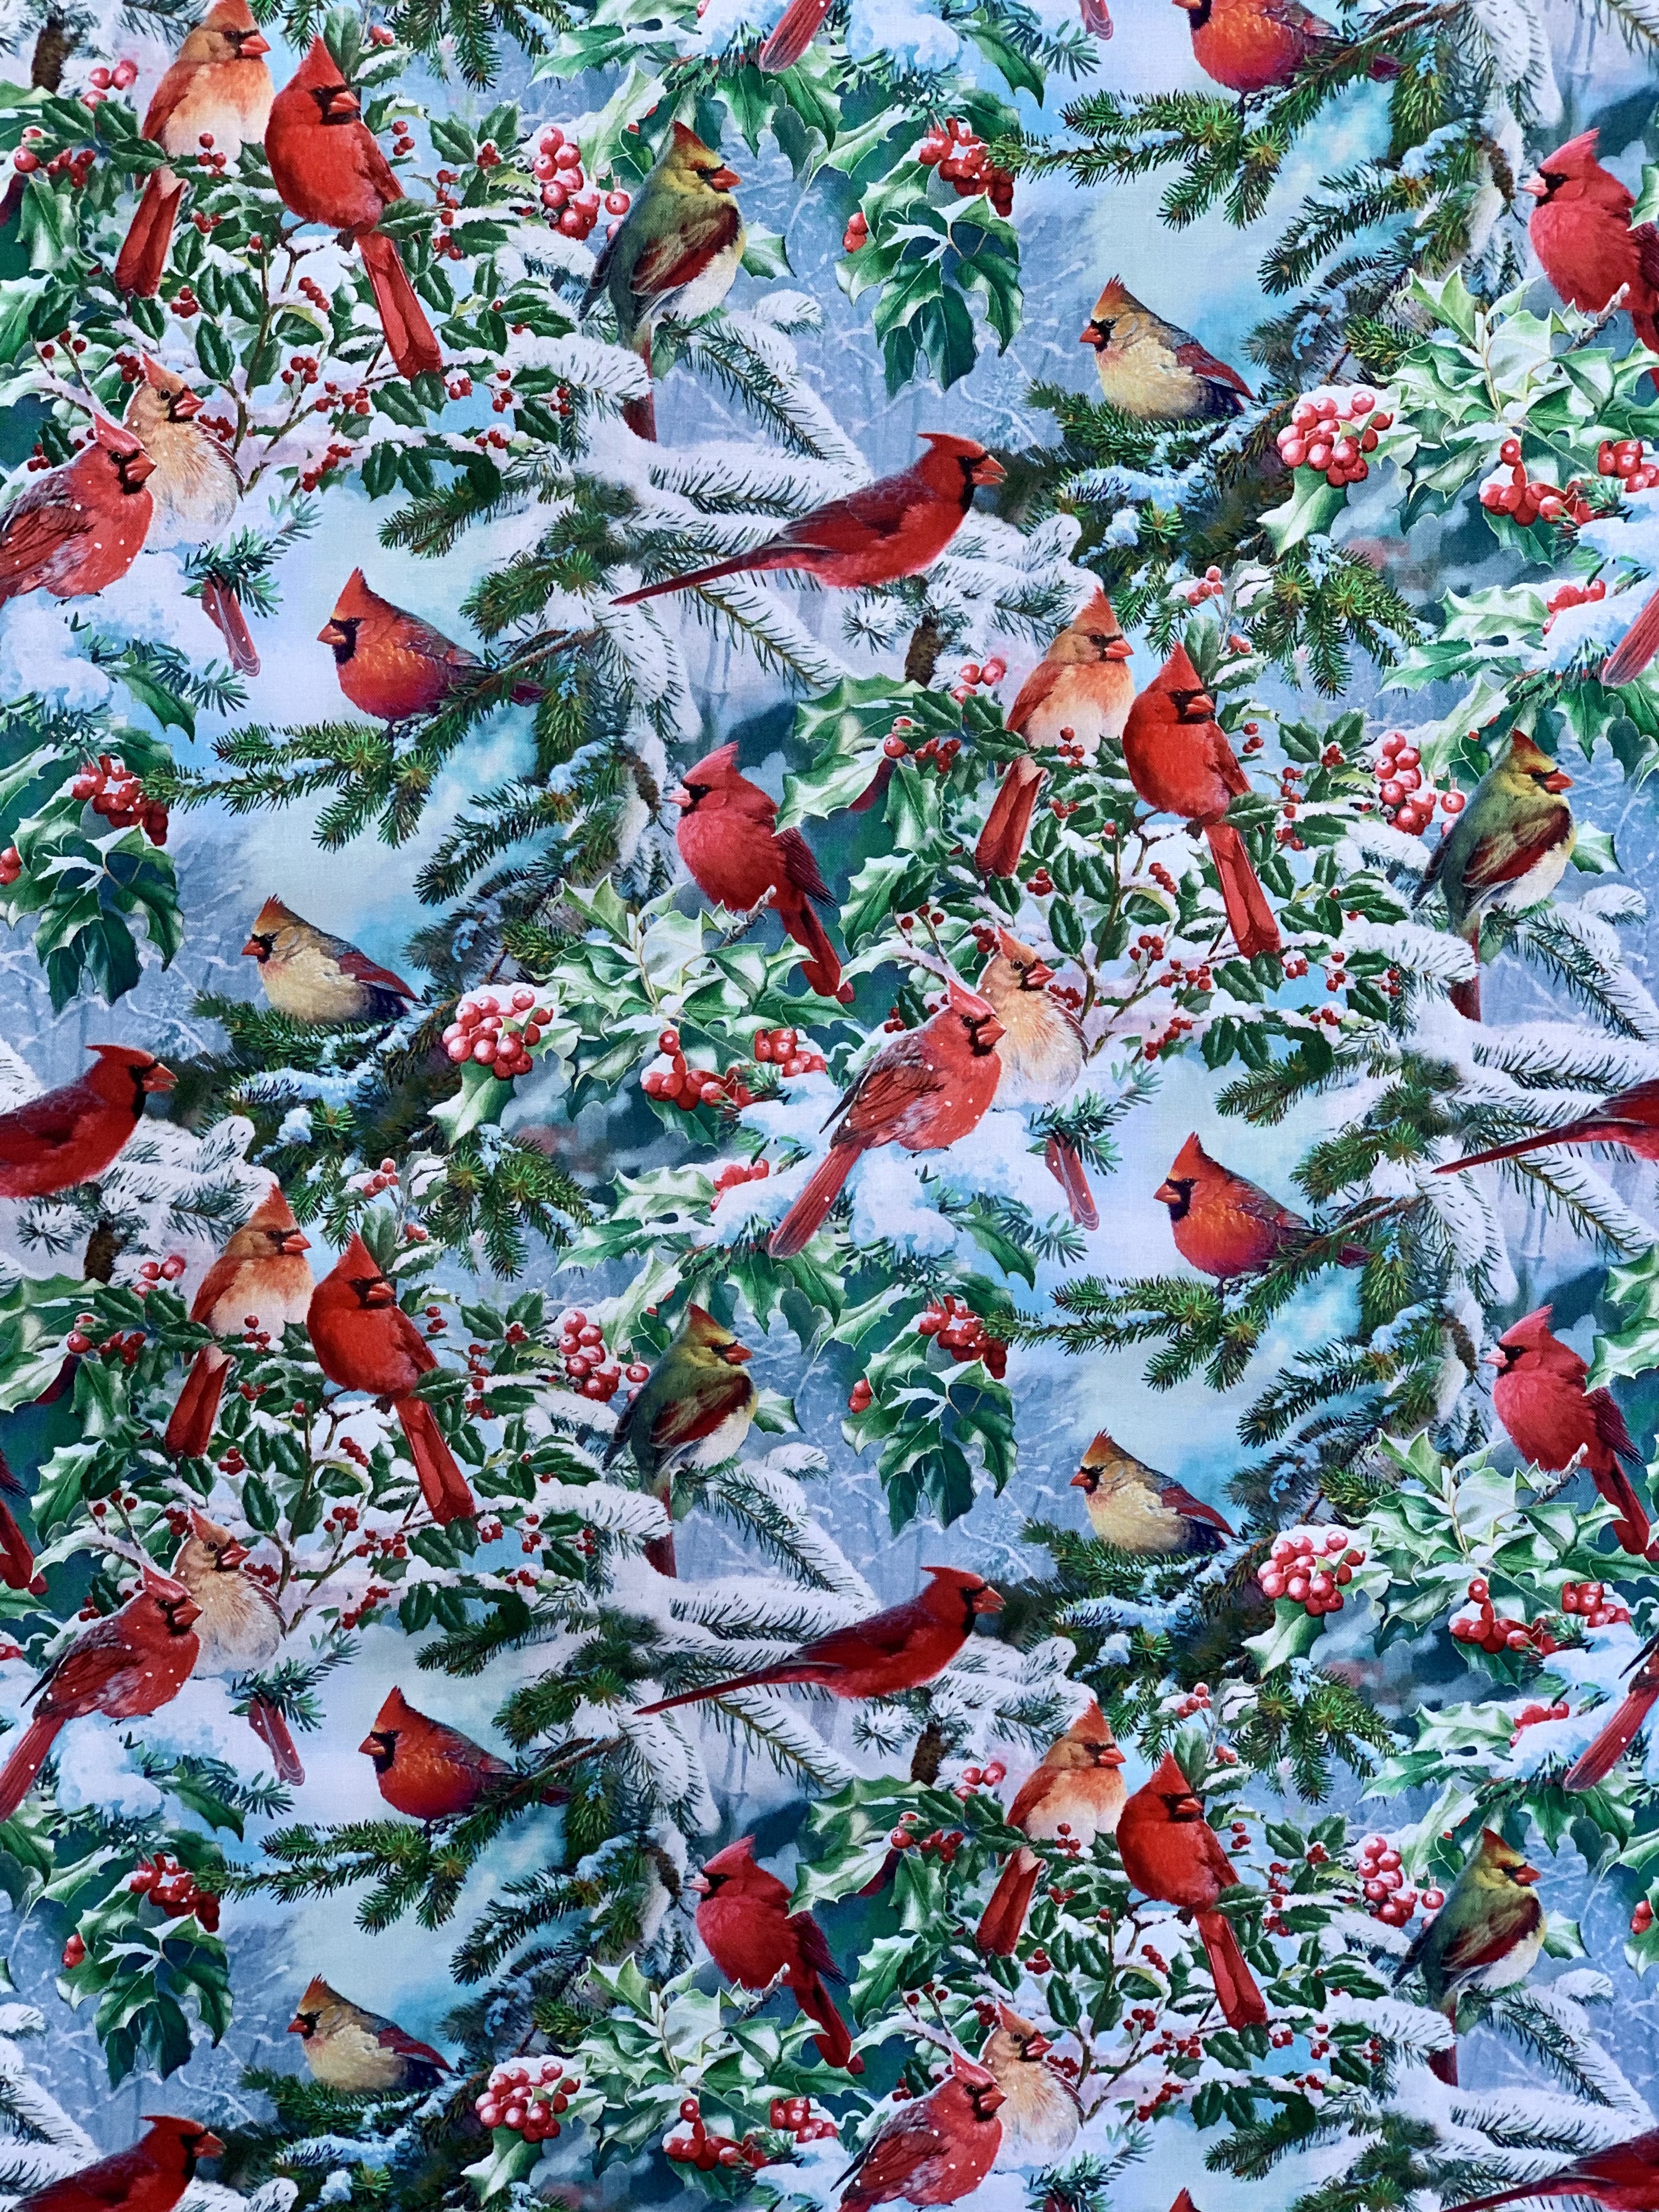 David Textiles Birds for all Seasons - Red Cardinals and Evergreens Panel and Fabric by the Yard - Christmas & Winter Fabric